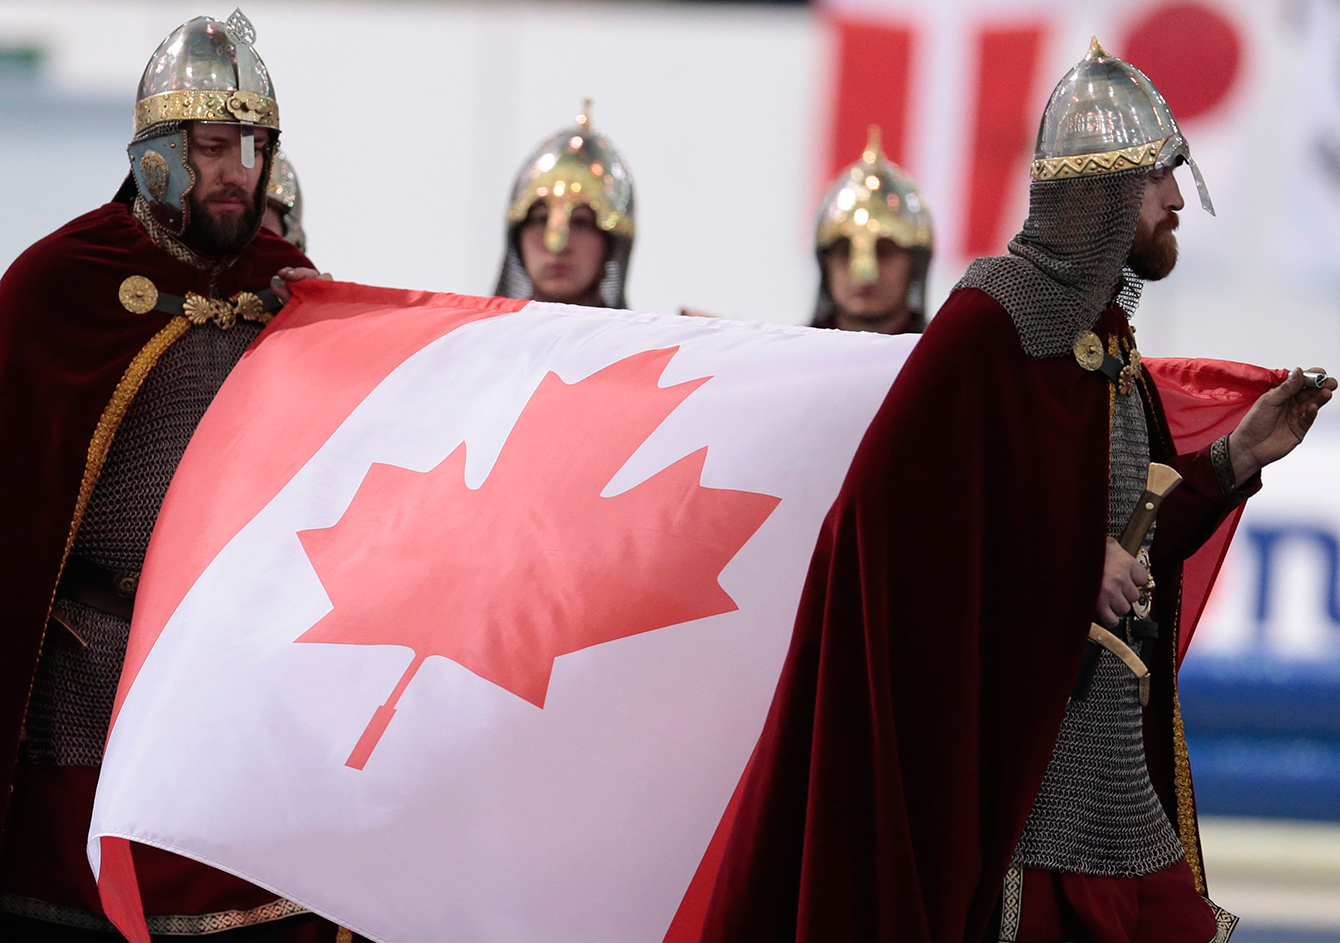 Performers, dressed as ancient Russian warriors, carry Canadian flag for the victory ceremony of the women's mass start race of the speed skating single distance World Championships in Kolomna, Russia, on February 14, 2016. (AP Photo/Ivan Sekretarev)